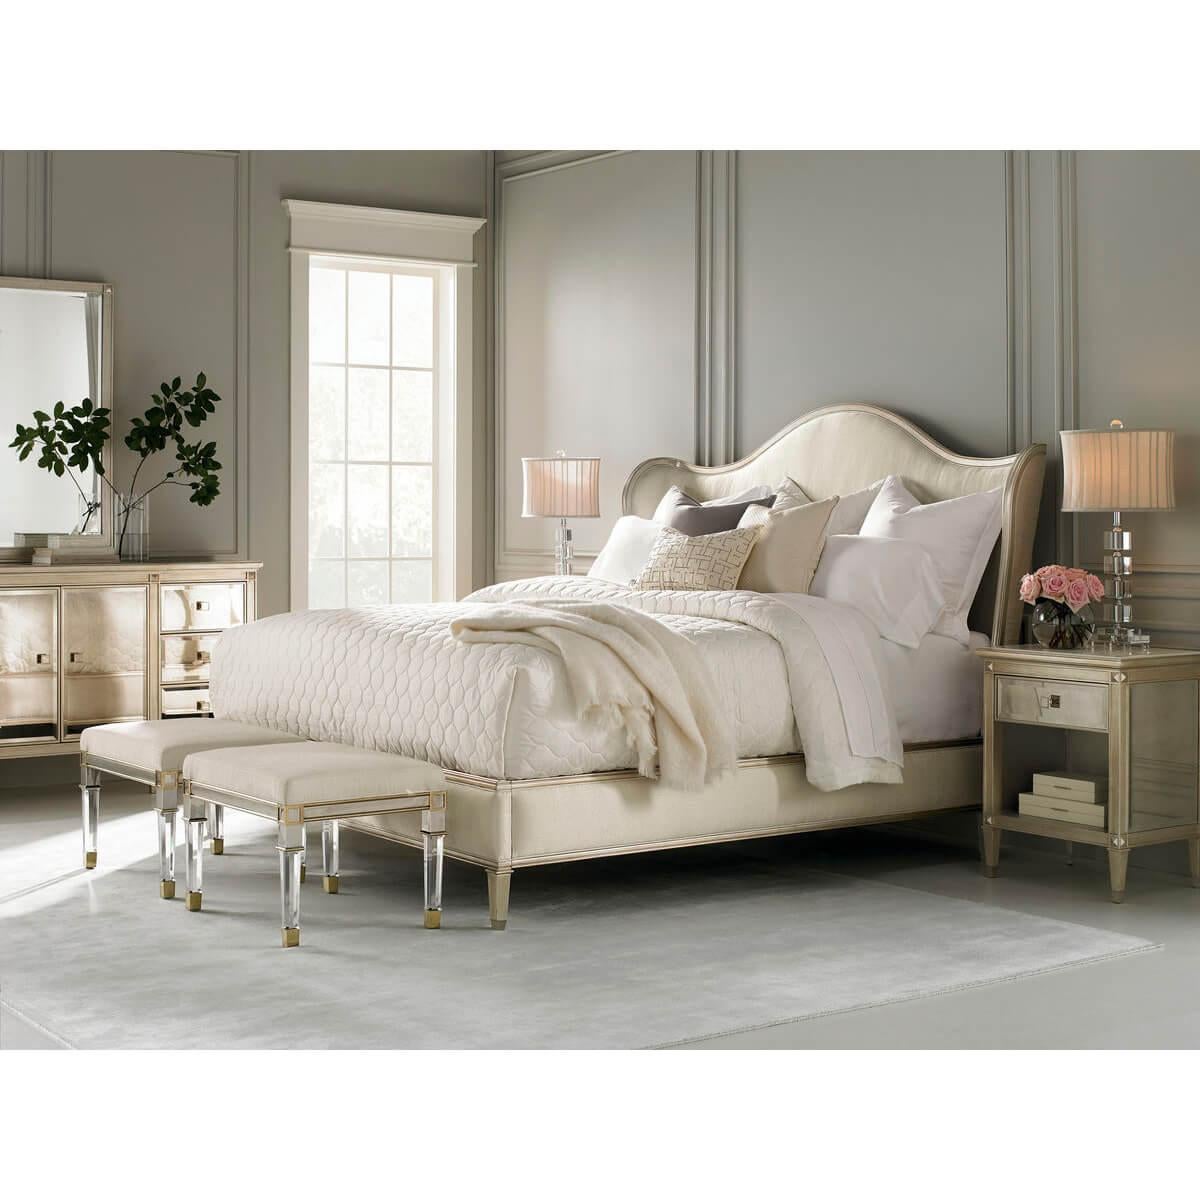 Transitional Style Upholstered Queen Bett (Holz) im Angebot